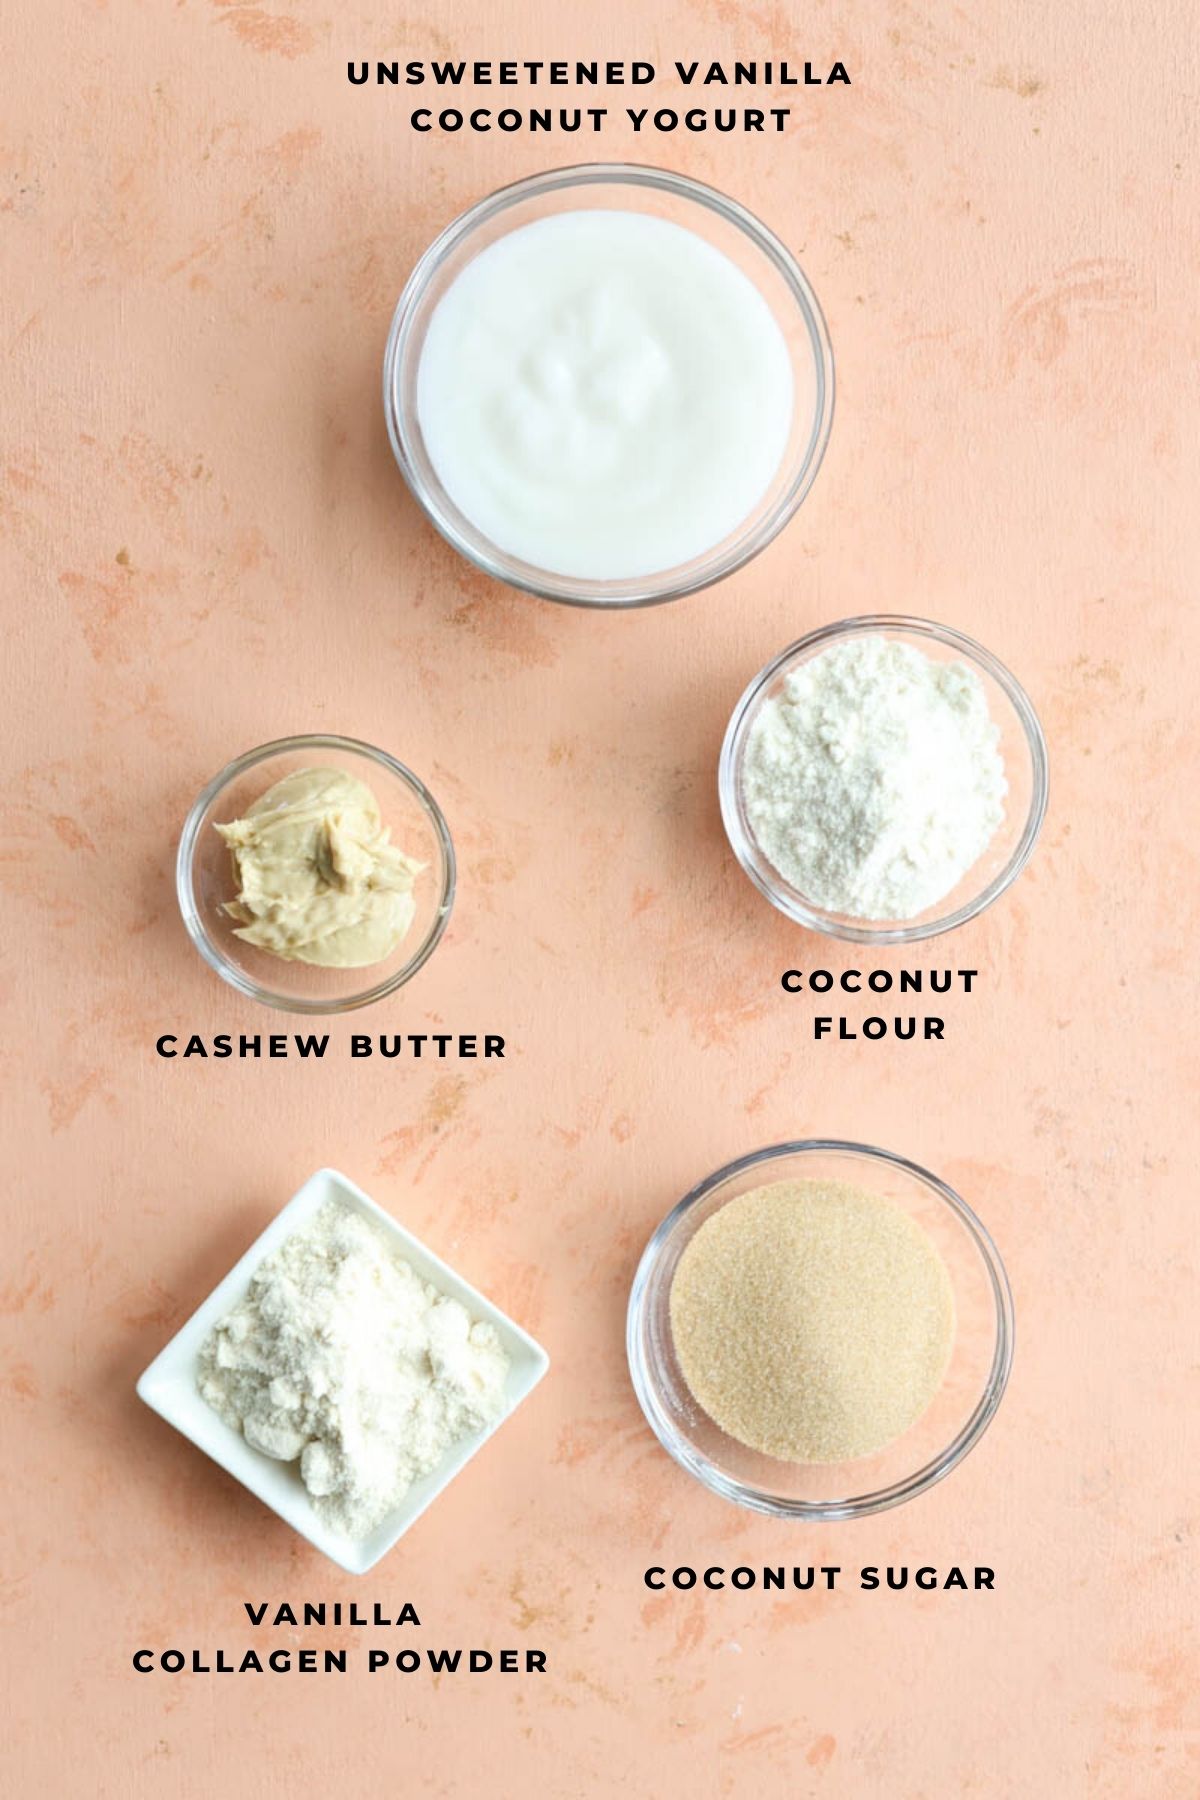 Ingredients for cookie dough measured out into small bowls.